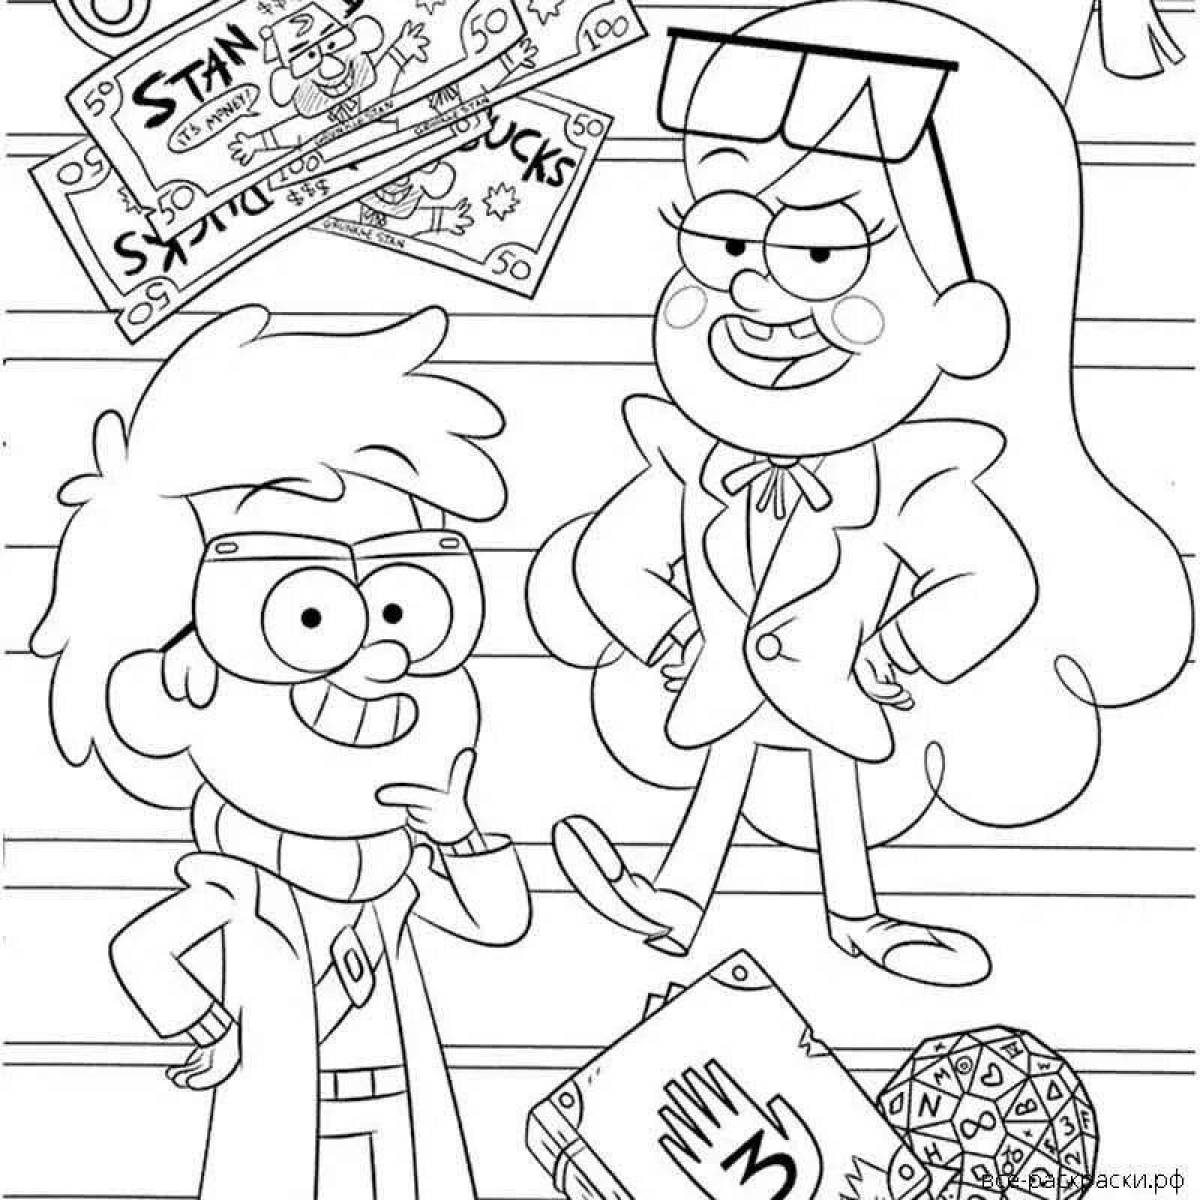 Charming mabel coloring page